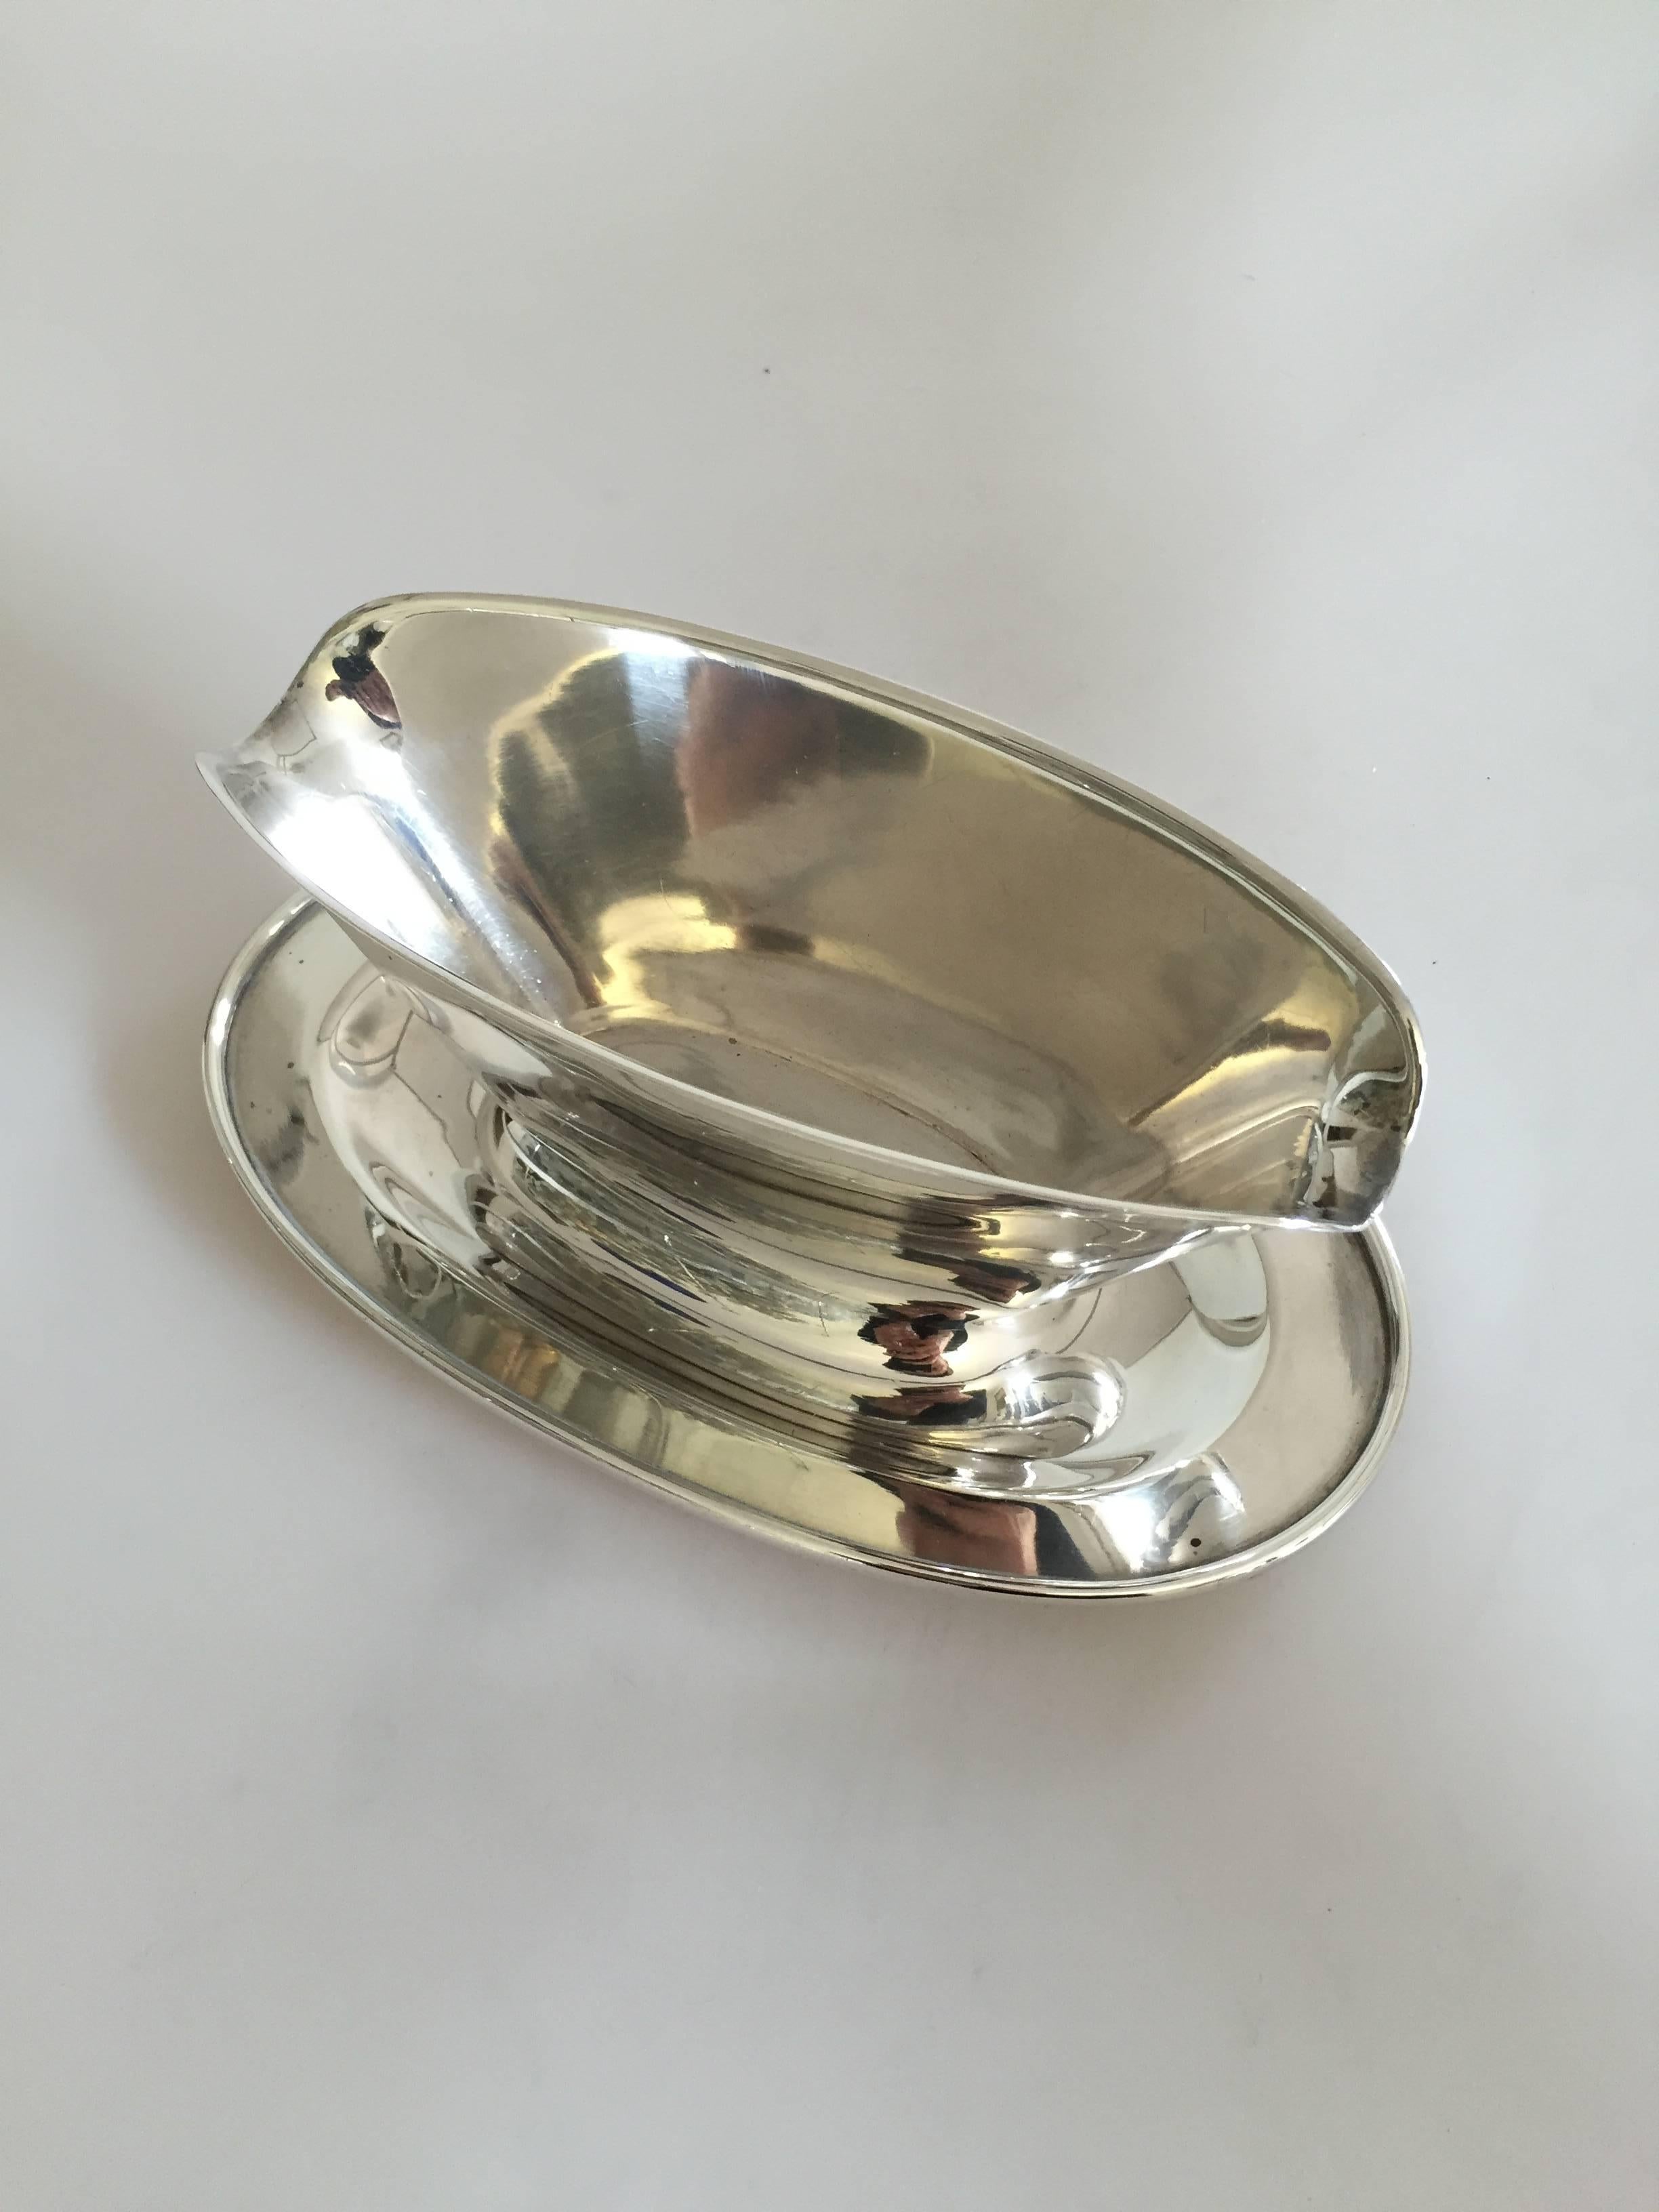 Hans Hansen Sterling silver sauce bowl by Karl Gustav Hansen. Measures 23 cm long and 9 cm high. In good condition. Made first time in 1944.

Hans Hansen (1884-1940) was a Danish silversmithy. He opened his own smithy and shop in Kolding, Denmark